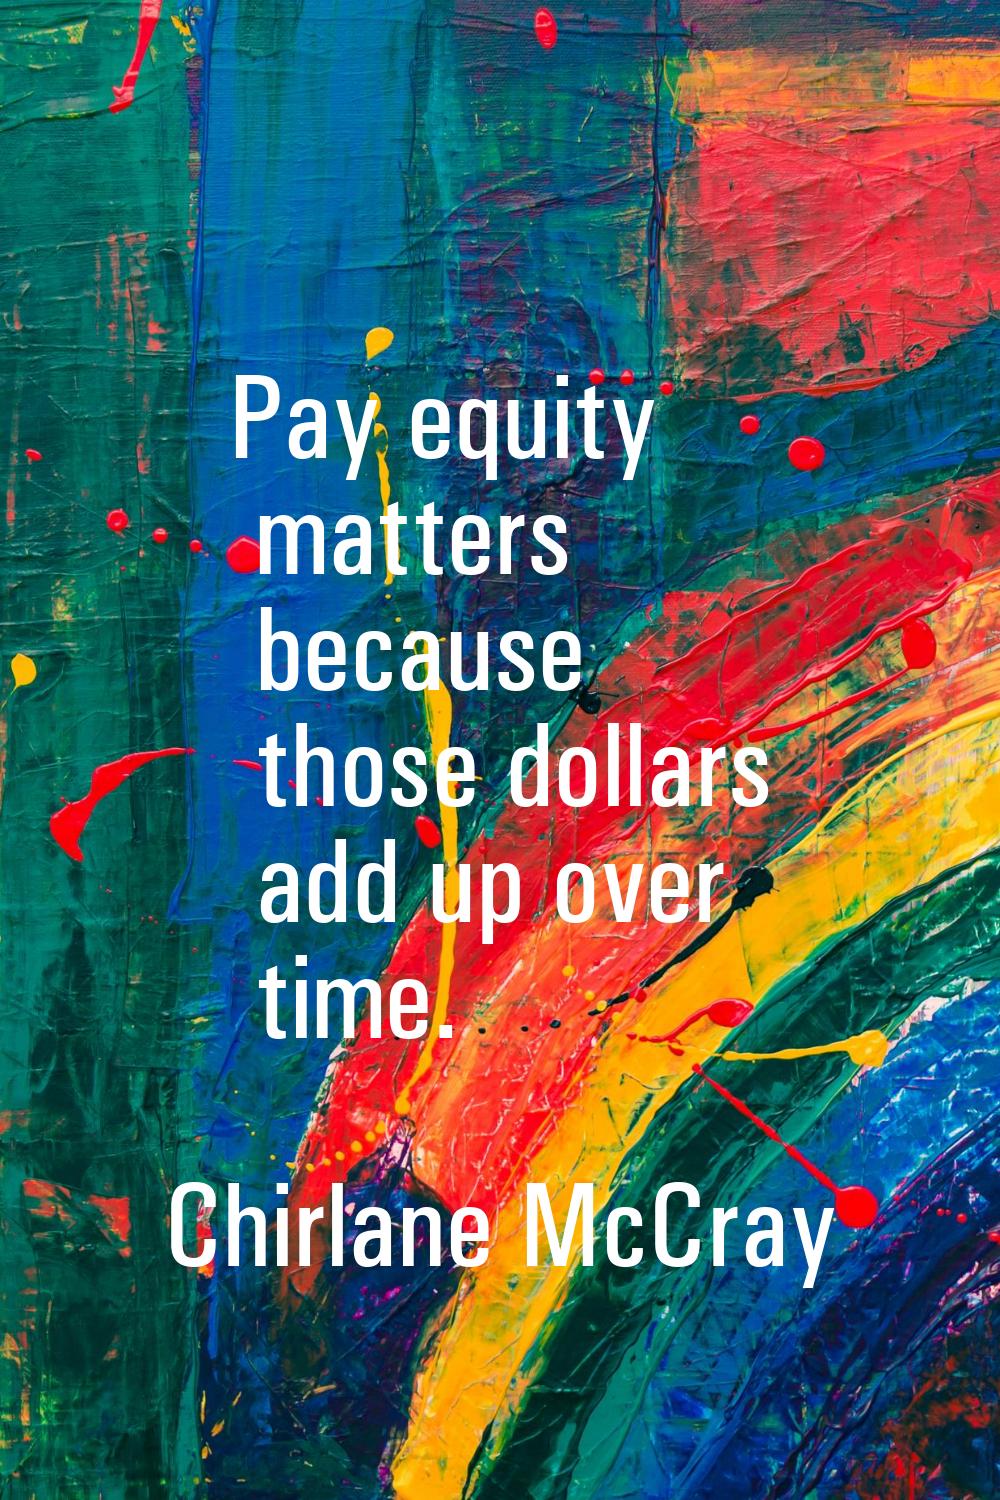 Pay equity matters because those dollars add up over time.